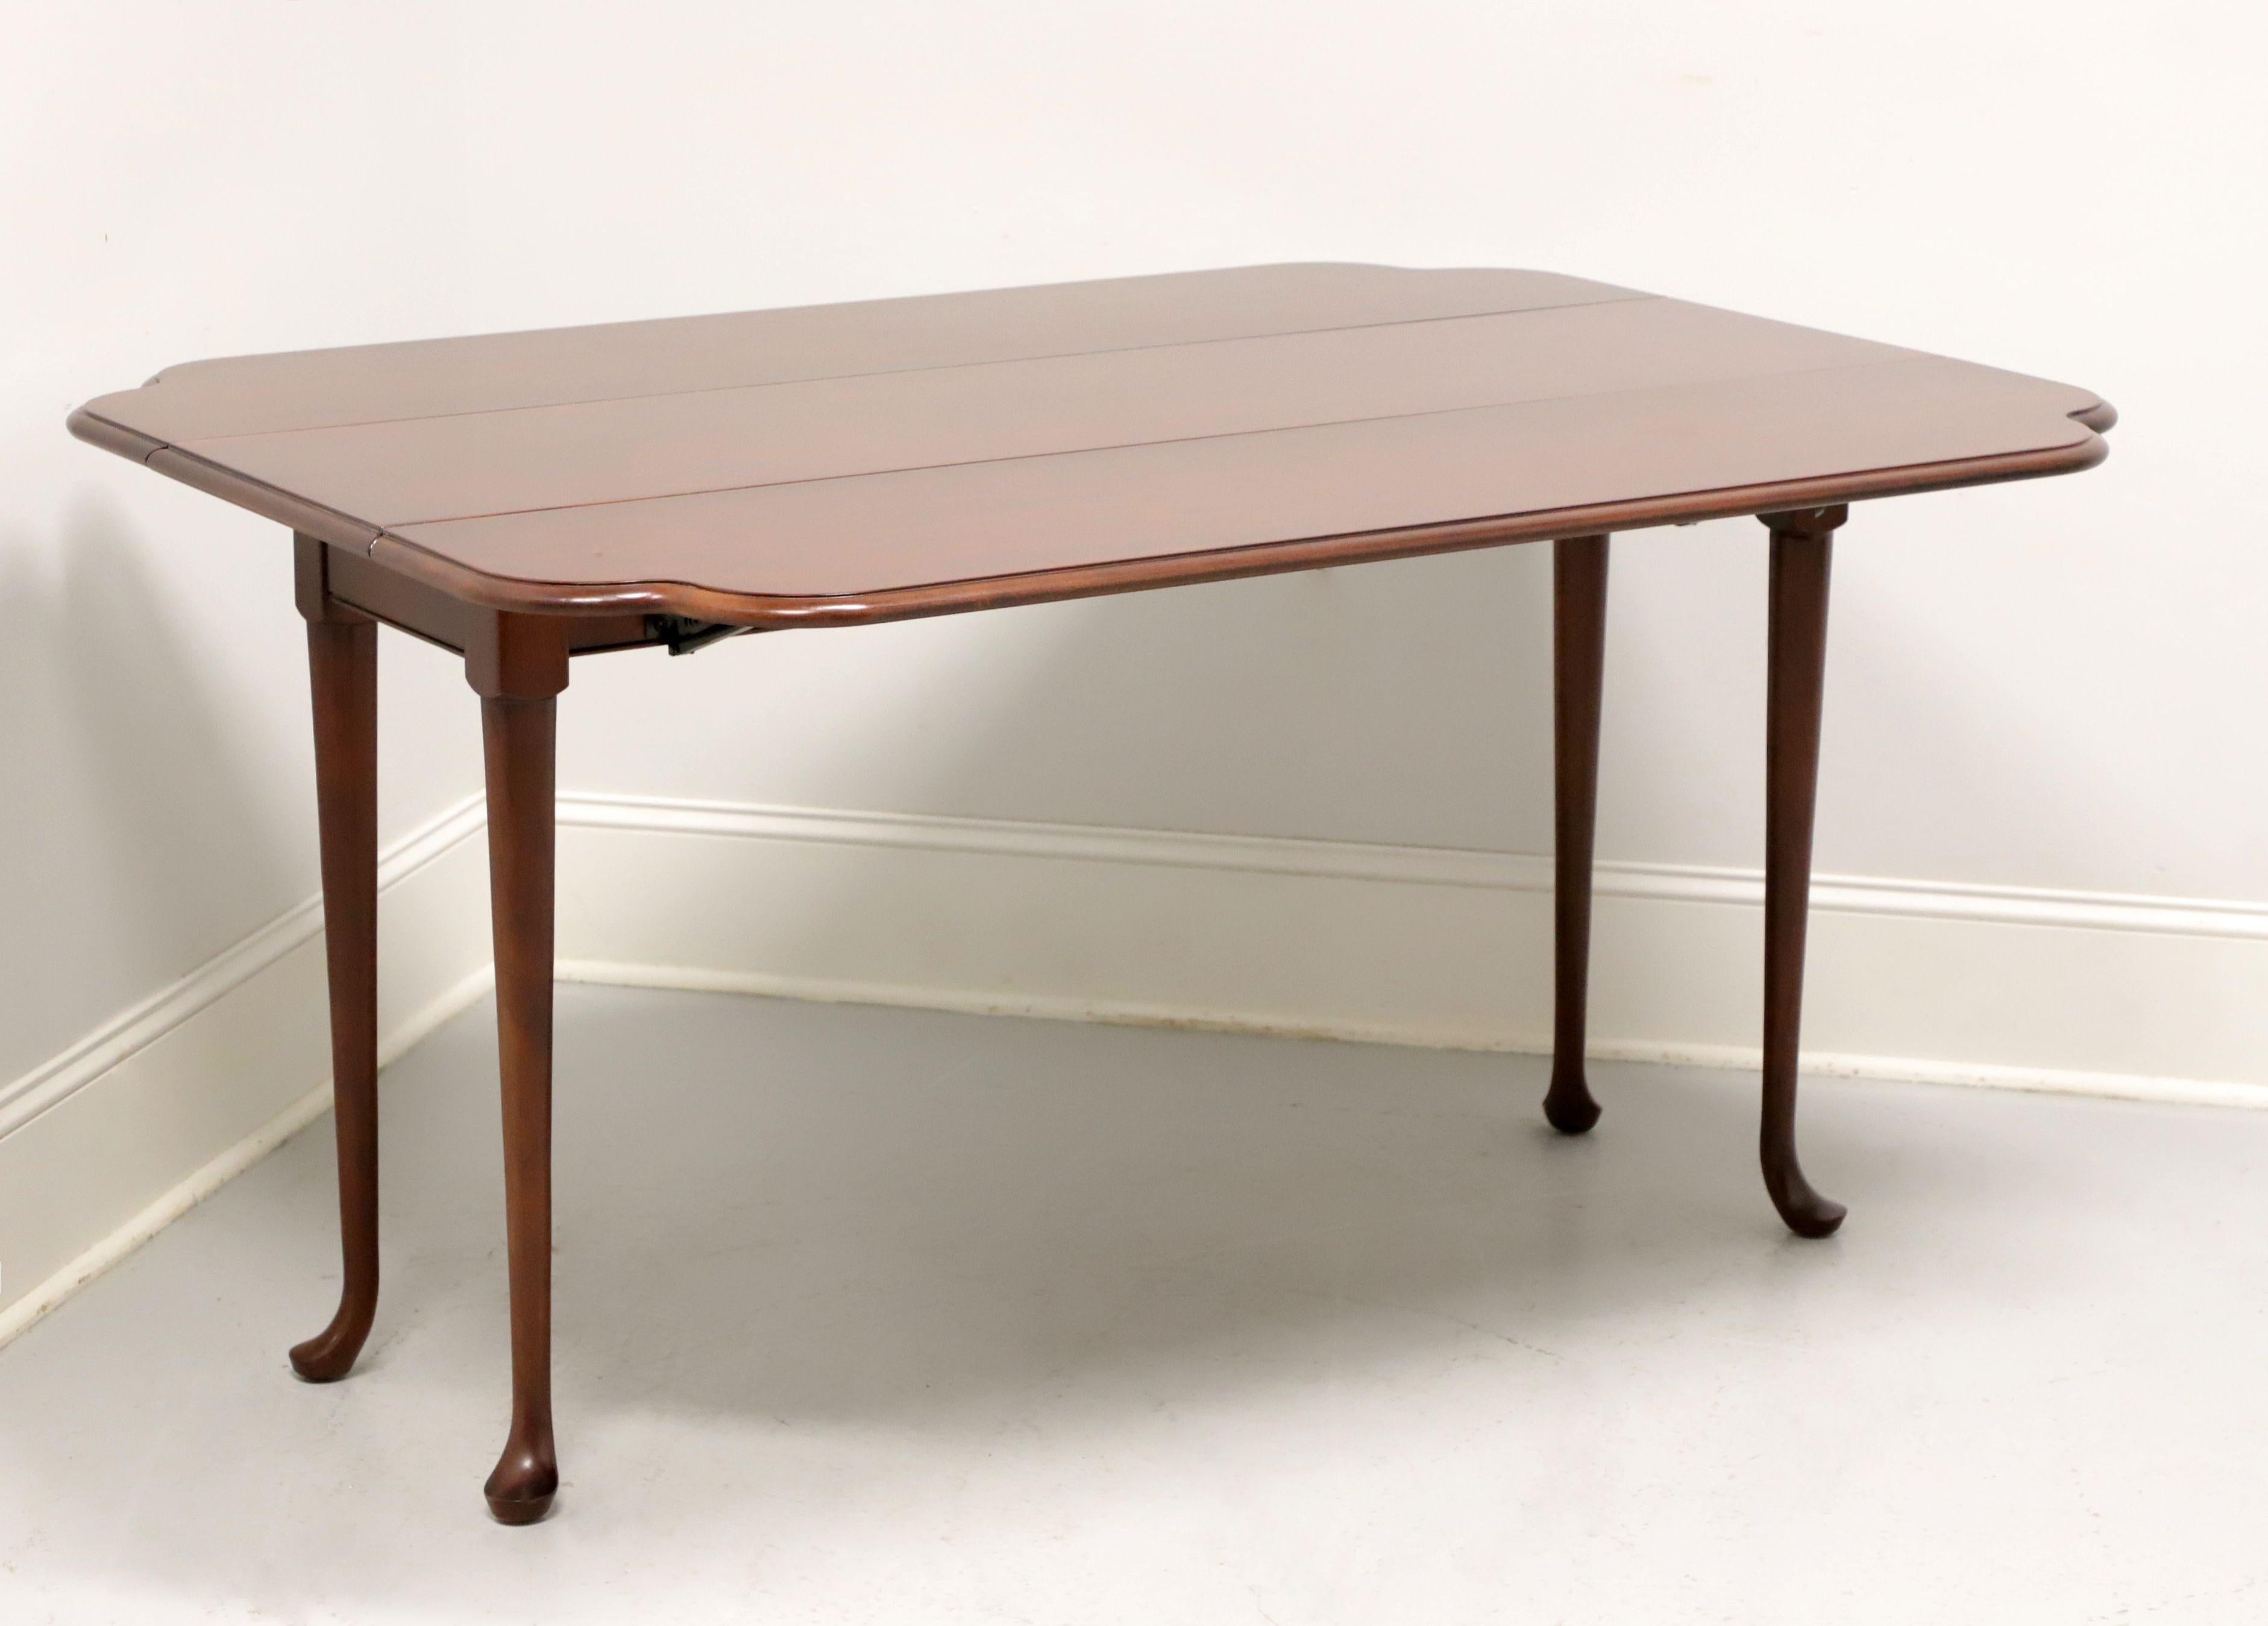 A Georgian style drop-leaf console sofa table by Drexel, from their Carleton Collection. Solid cherry with bevel edge top, clipped corners to drop leaves, slightly curved legs and pad feet. Features two drop leaves that can be raised for additional